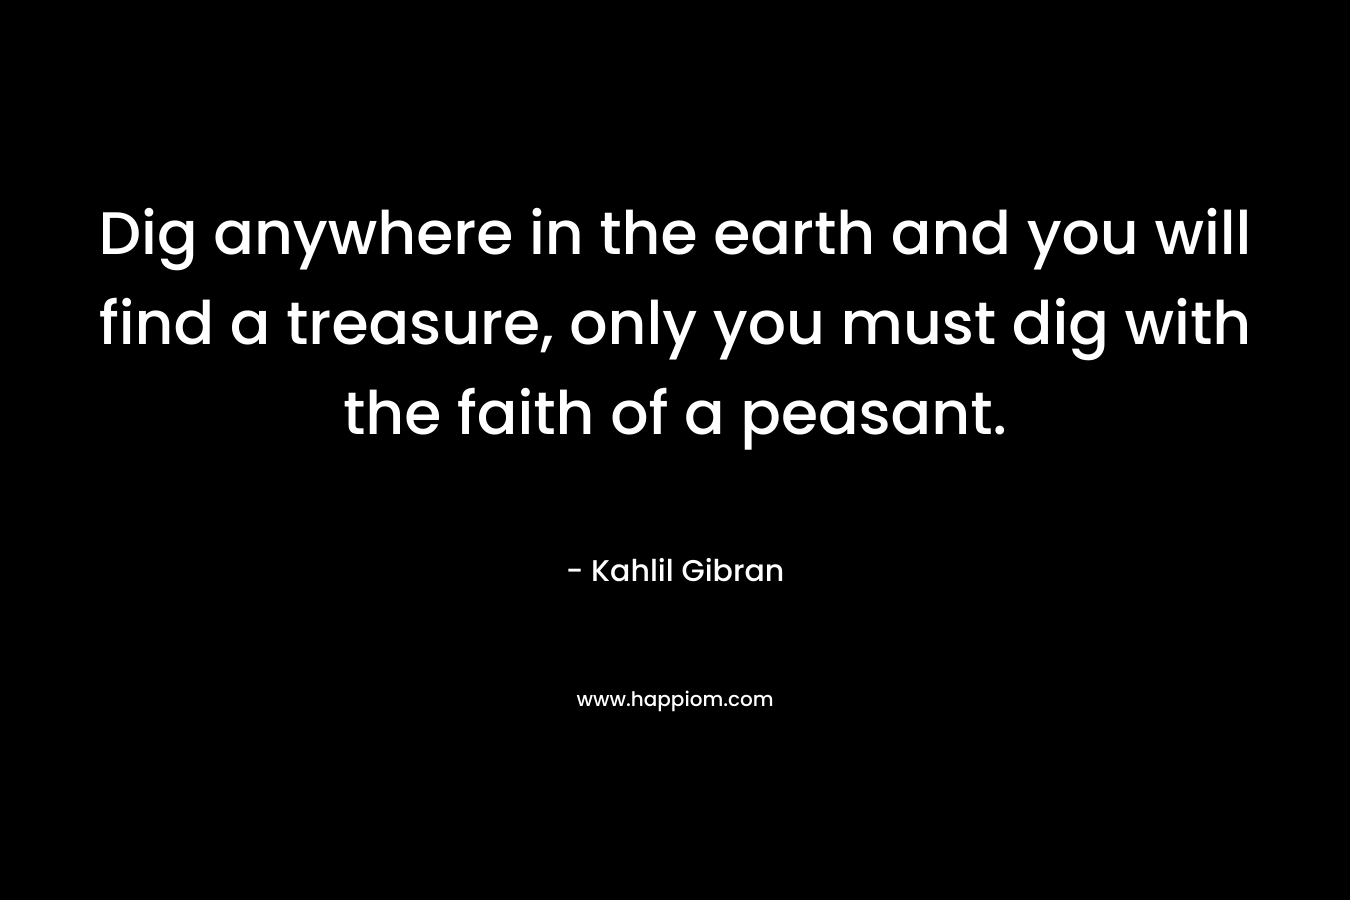 Dig anywhere in the earth and you will find a treasure, only you must dig with the faith of a peasant.